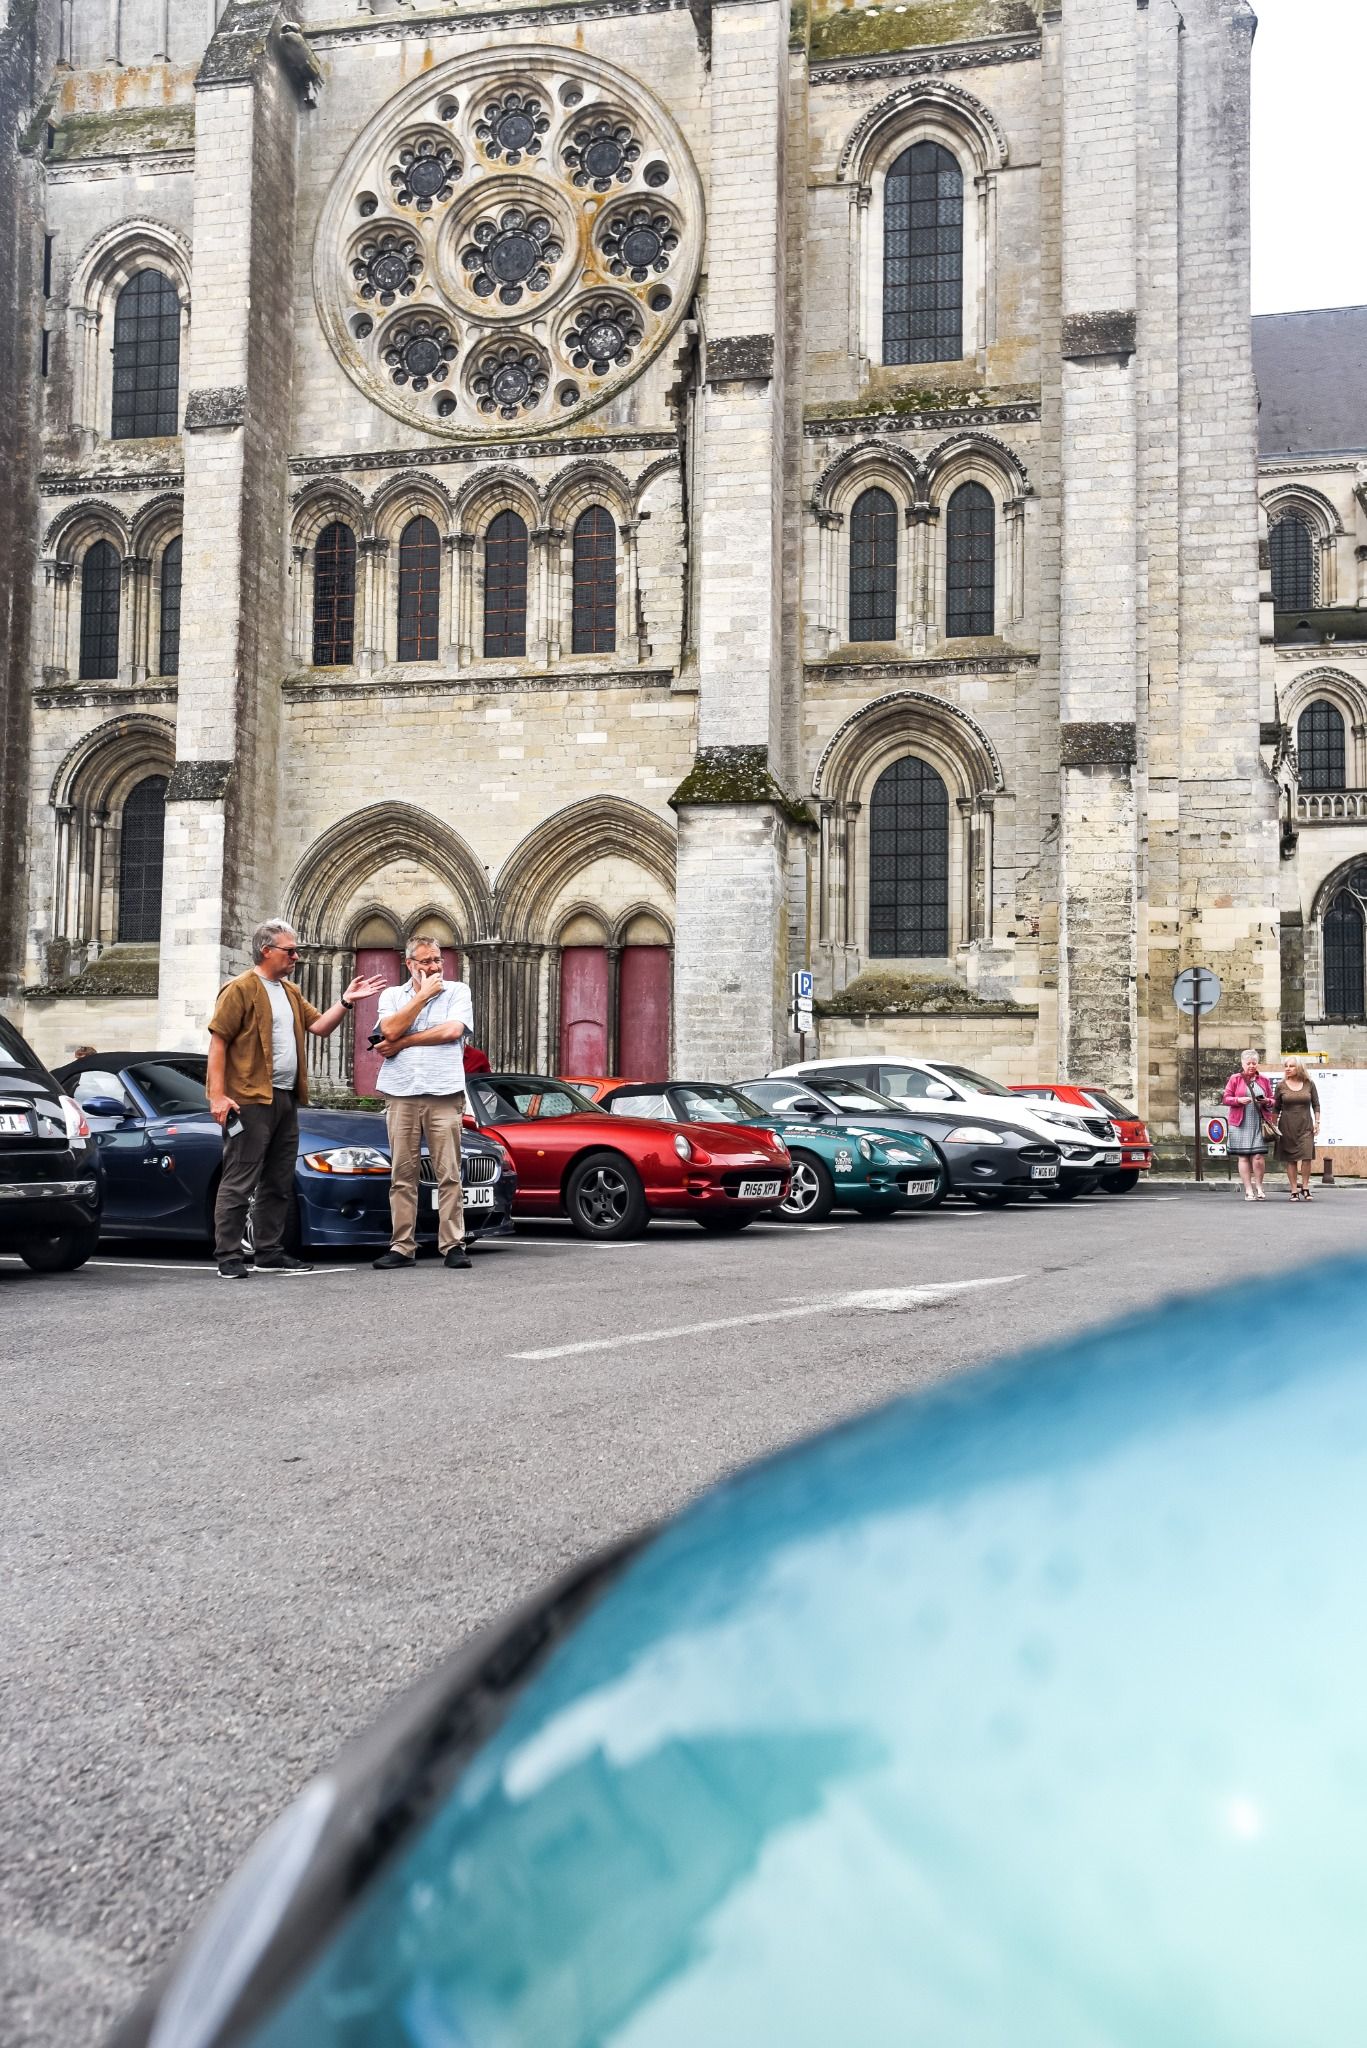 Two men standing in a car park next to a church